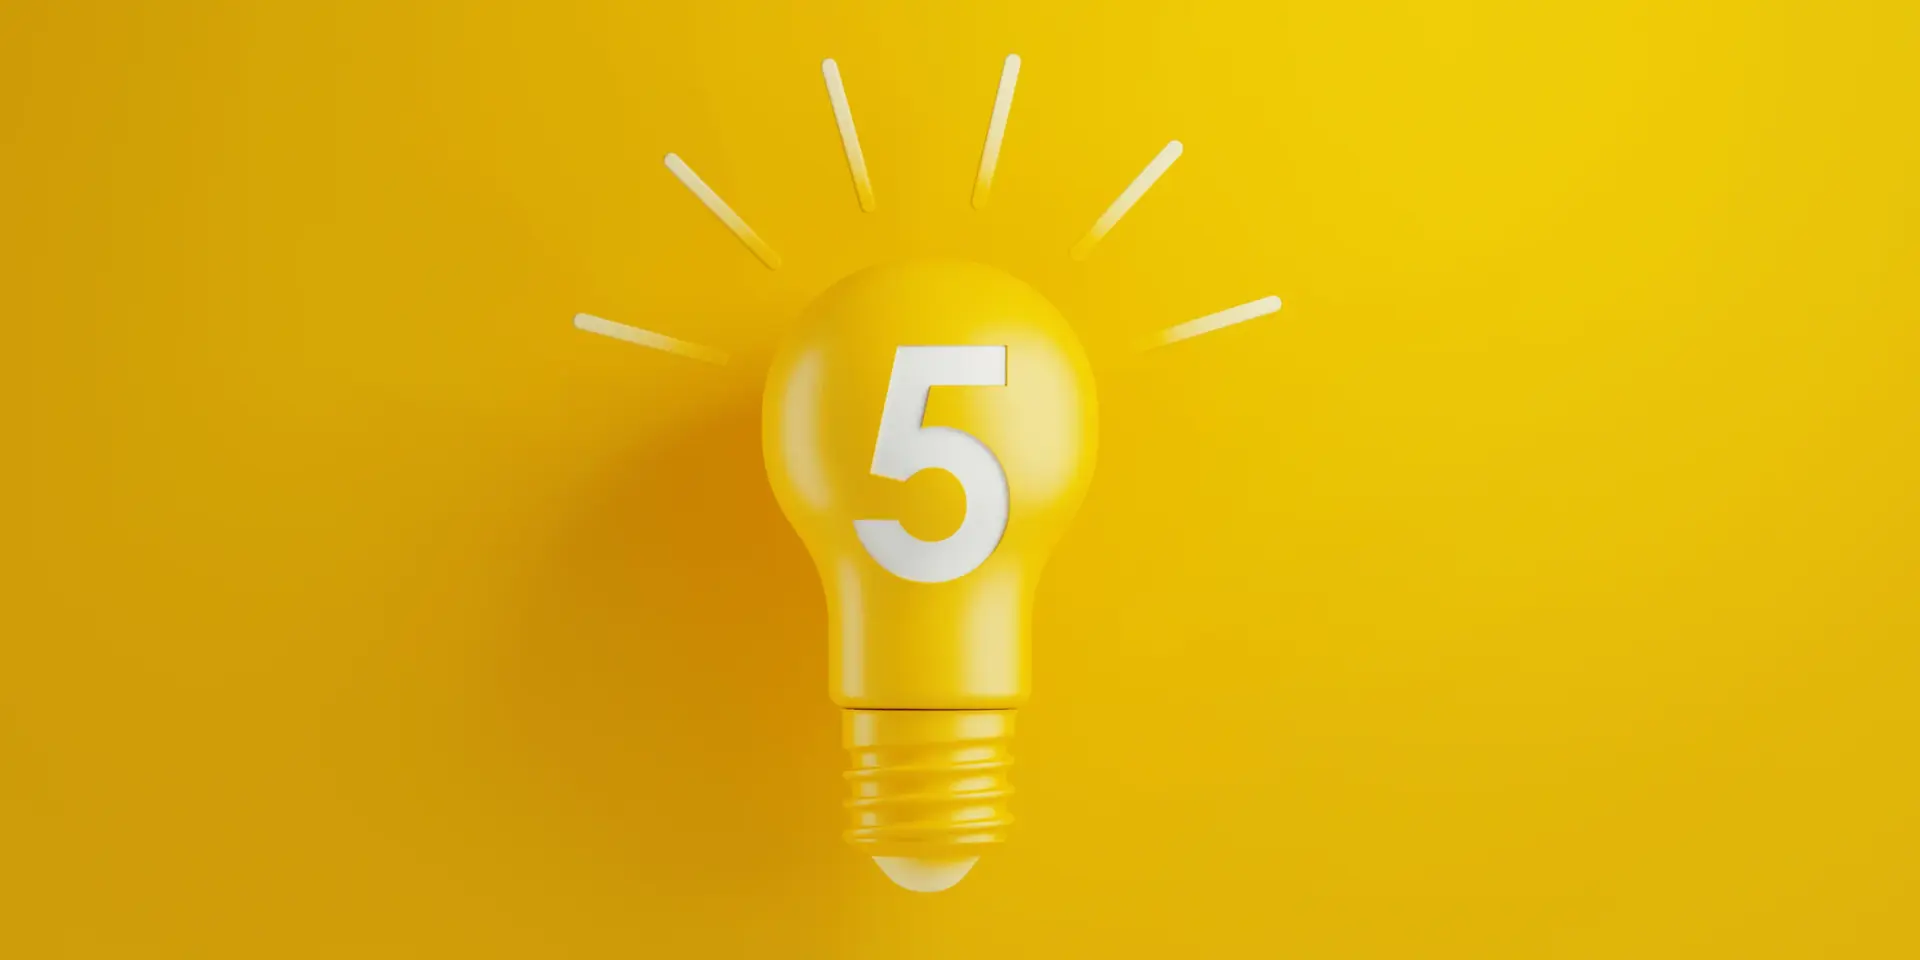 Light bulb on a yellow background.